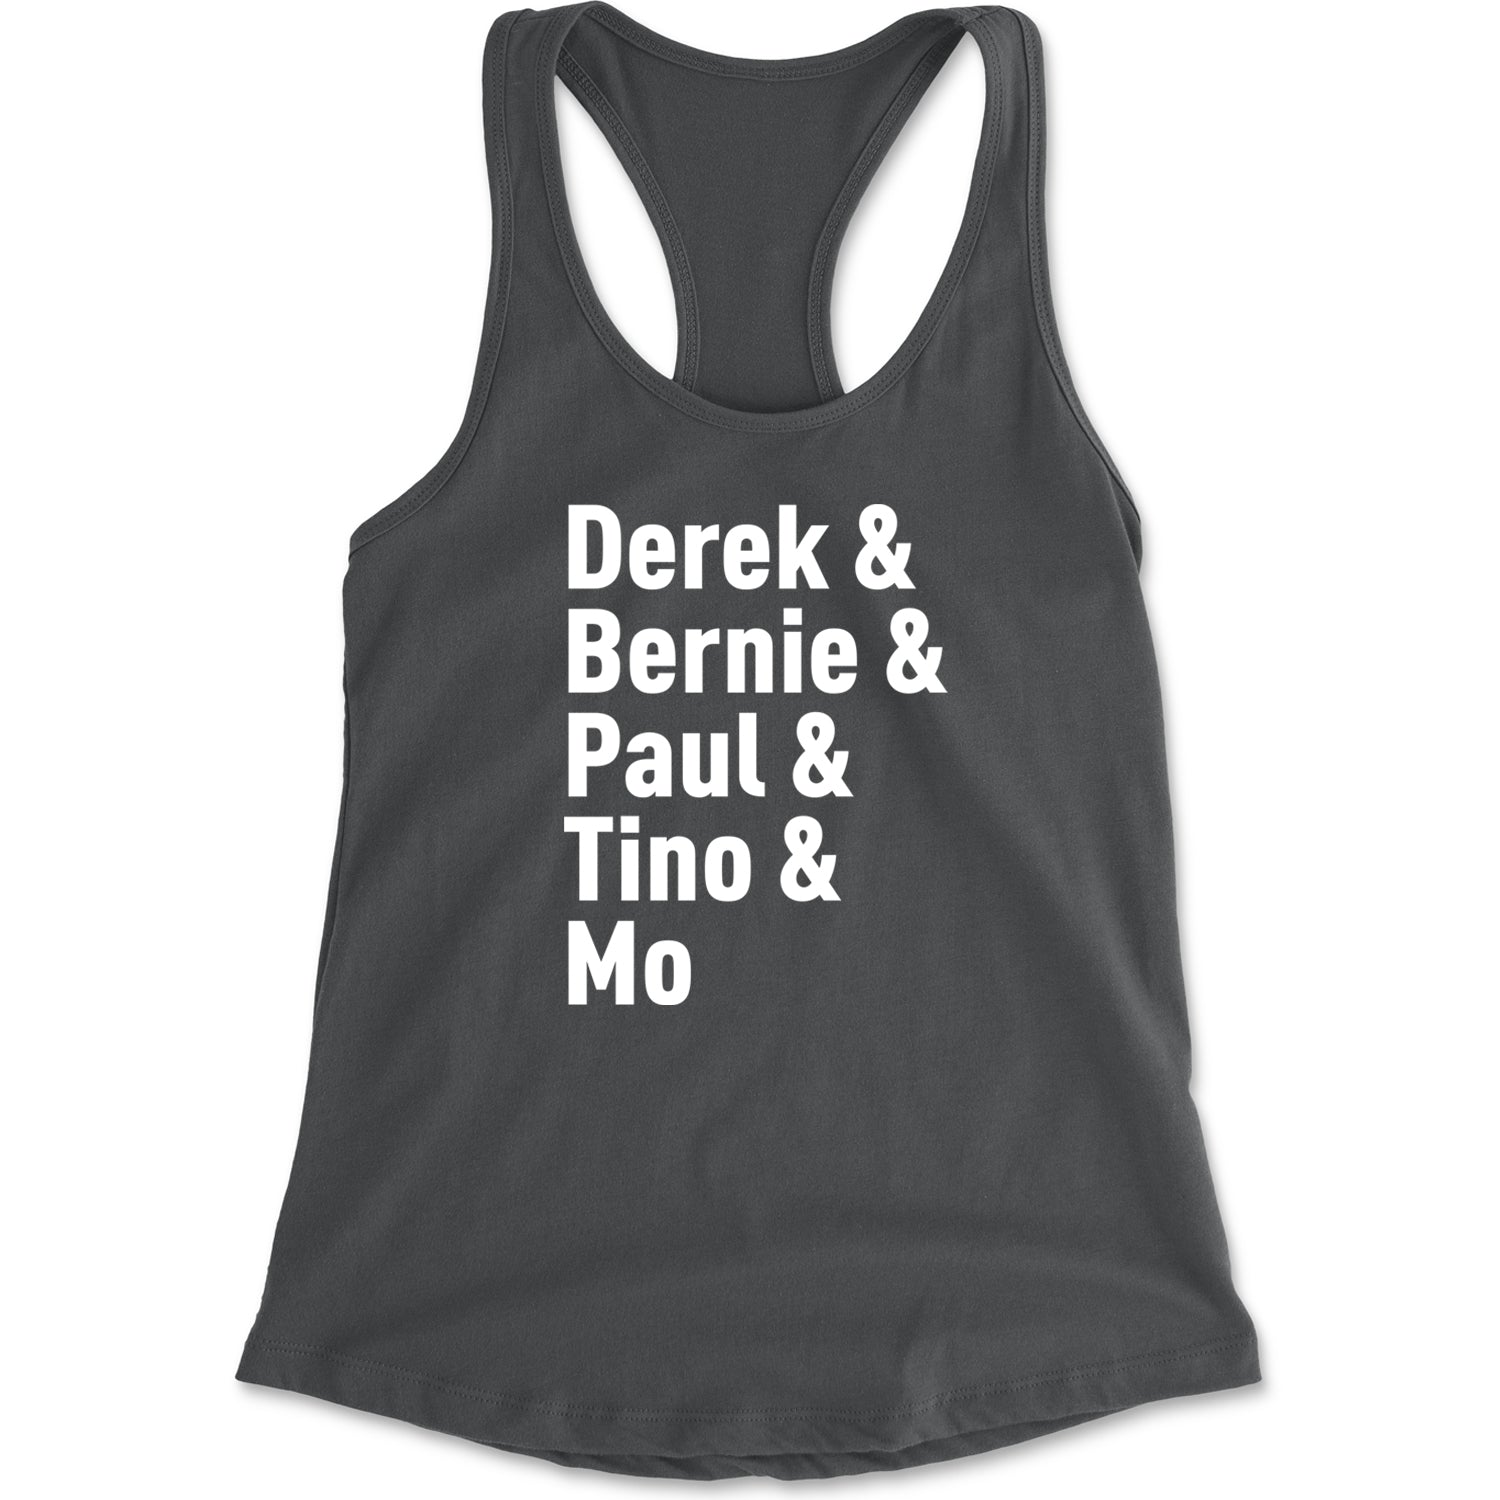 Derek and Bernie and Paul and Tino and Mo Racerback Tank Top for Women baseball, comes, here, judge, the by Expression Tees